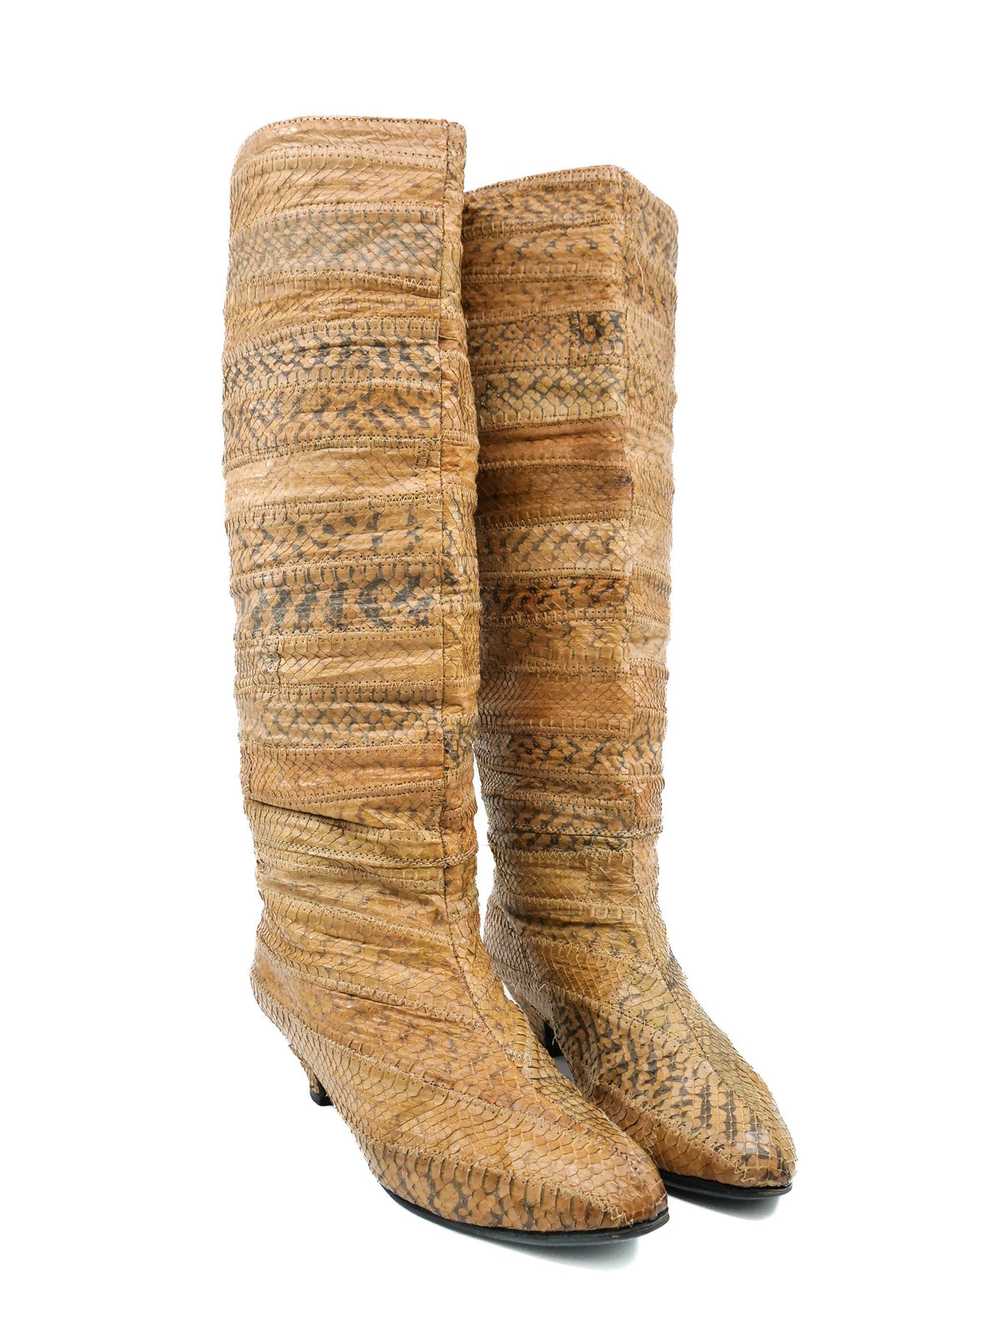 1980s Tan Patchwork Snakeskin Knee High Boots, 7 - image 3